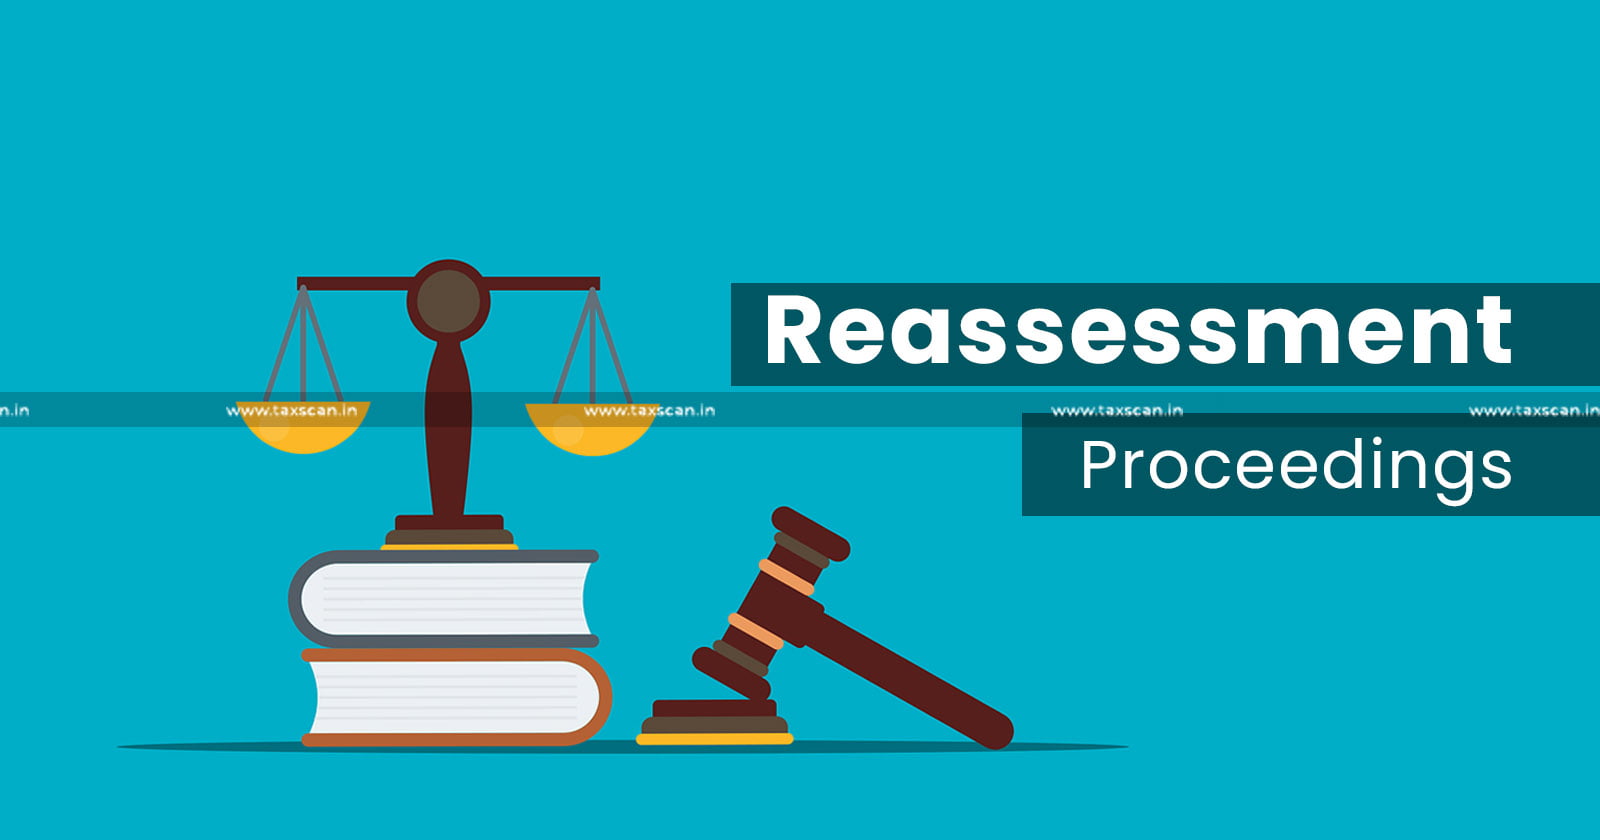 Reassessment Proceedings Commenced after 3 years - Reassessment Proceedings - Time-Barred - Delhi High Court - taxscan